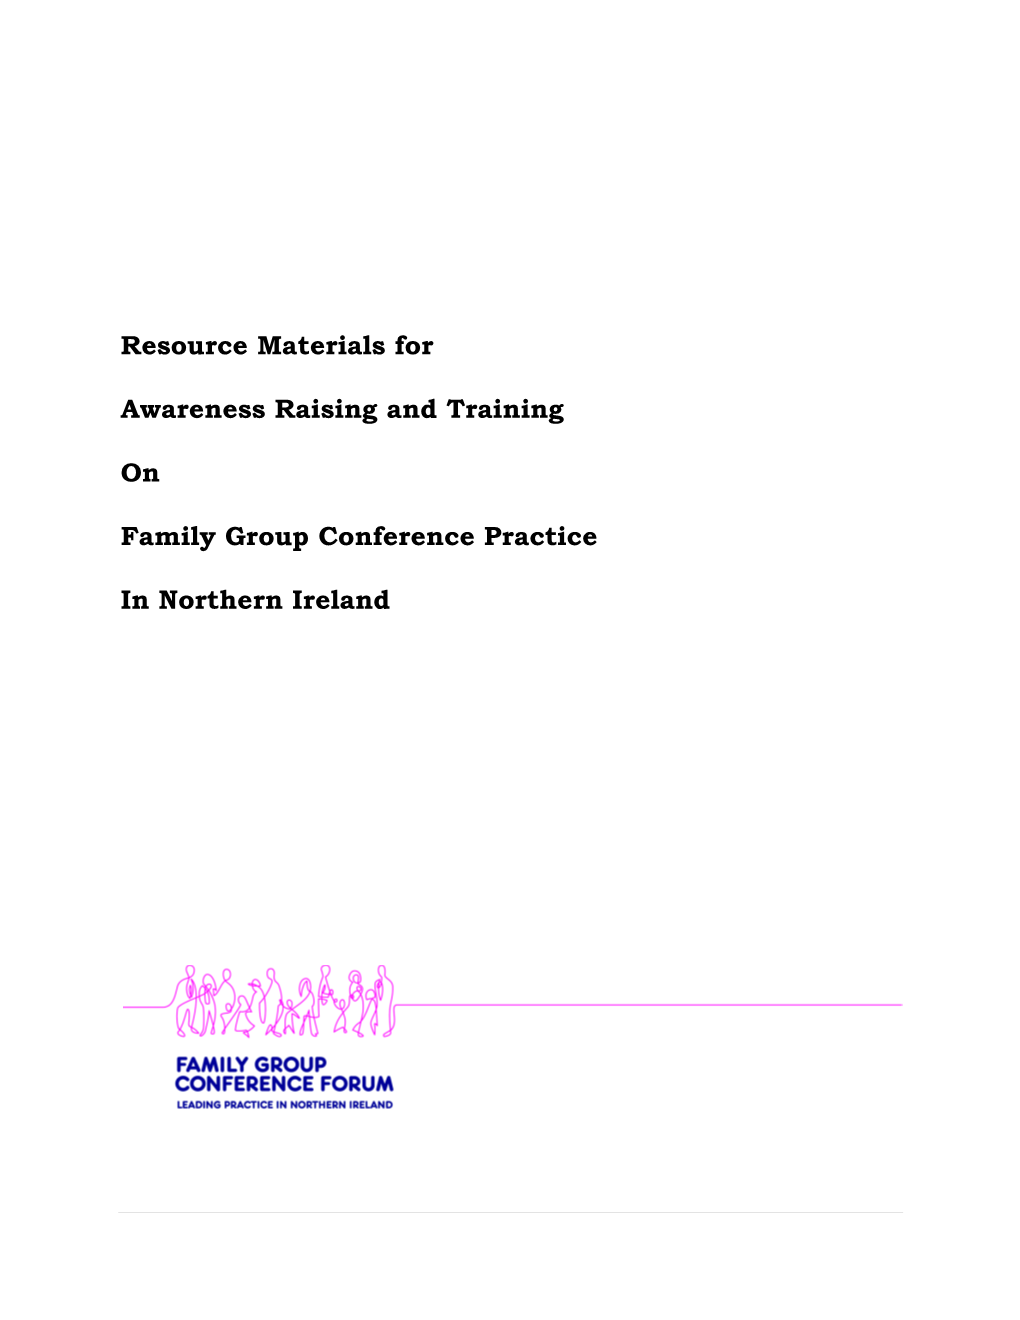 Resource Materials for Awareness Raising and Training on Family